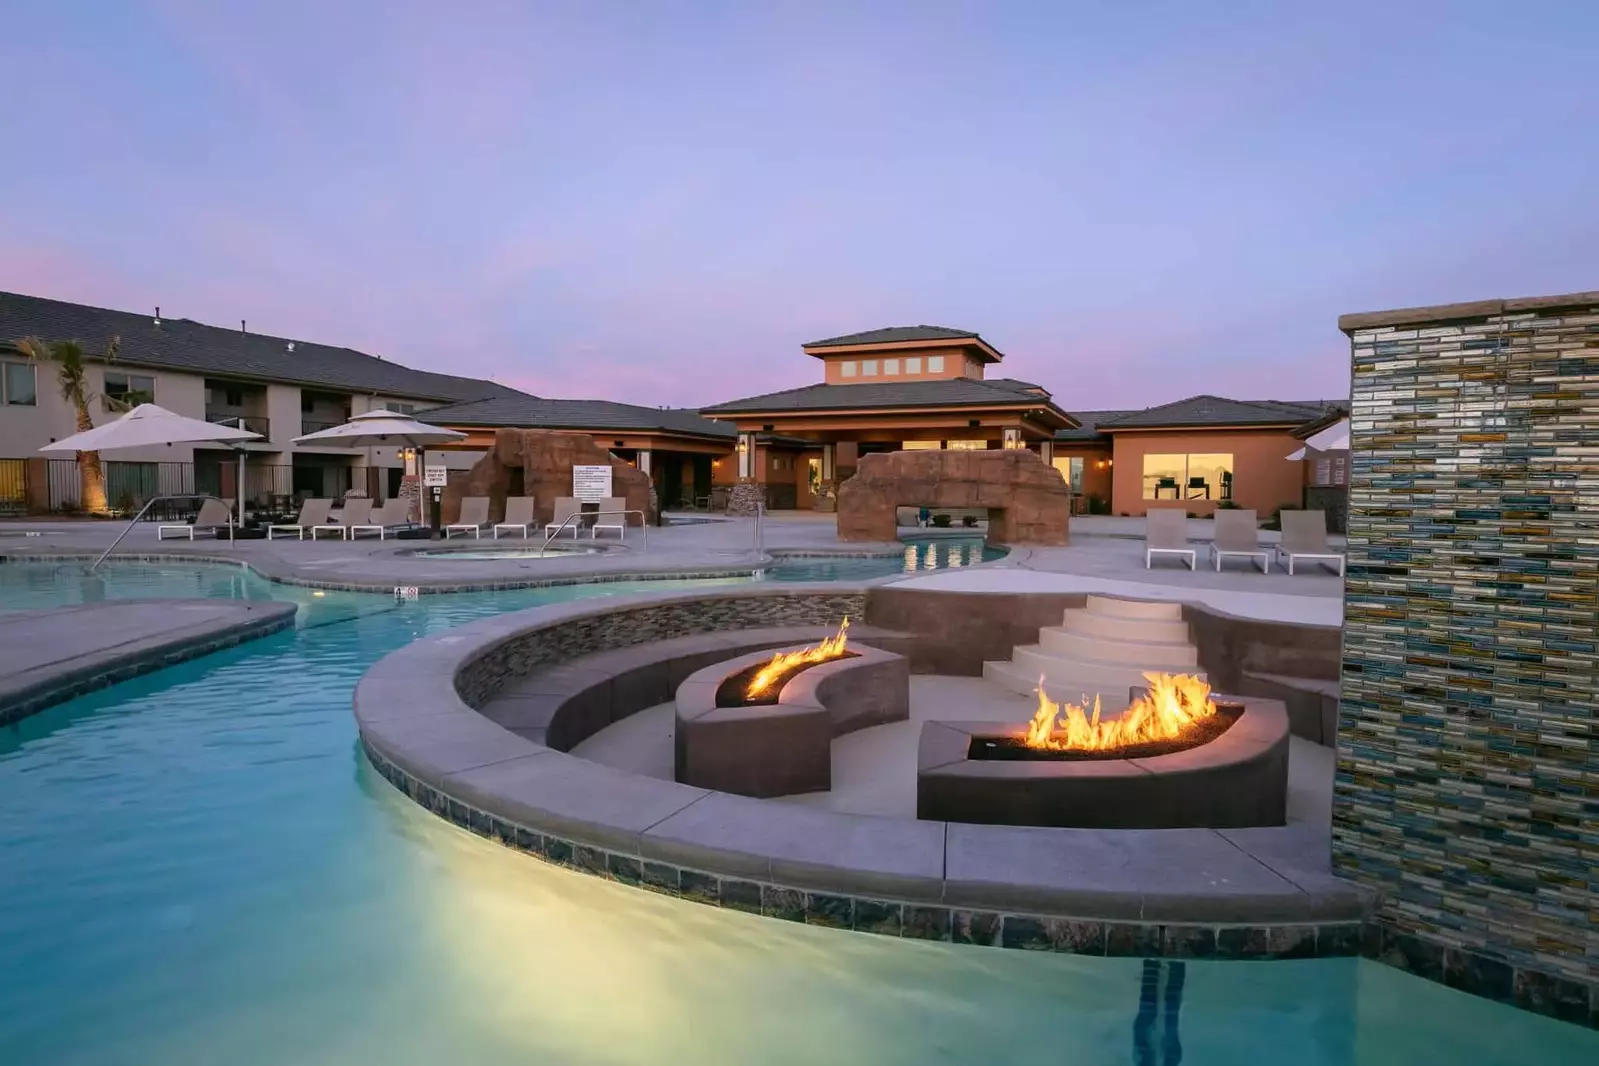 Hot Tub, Pool, and Fire Pit (1)